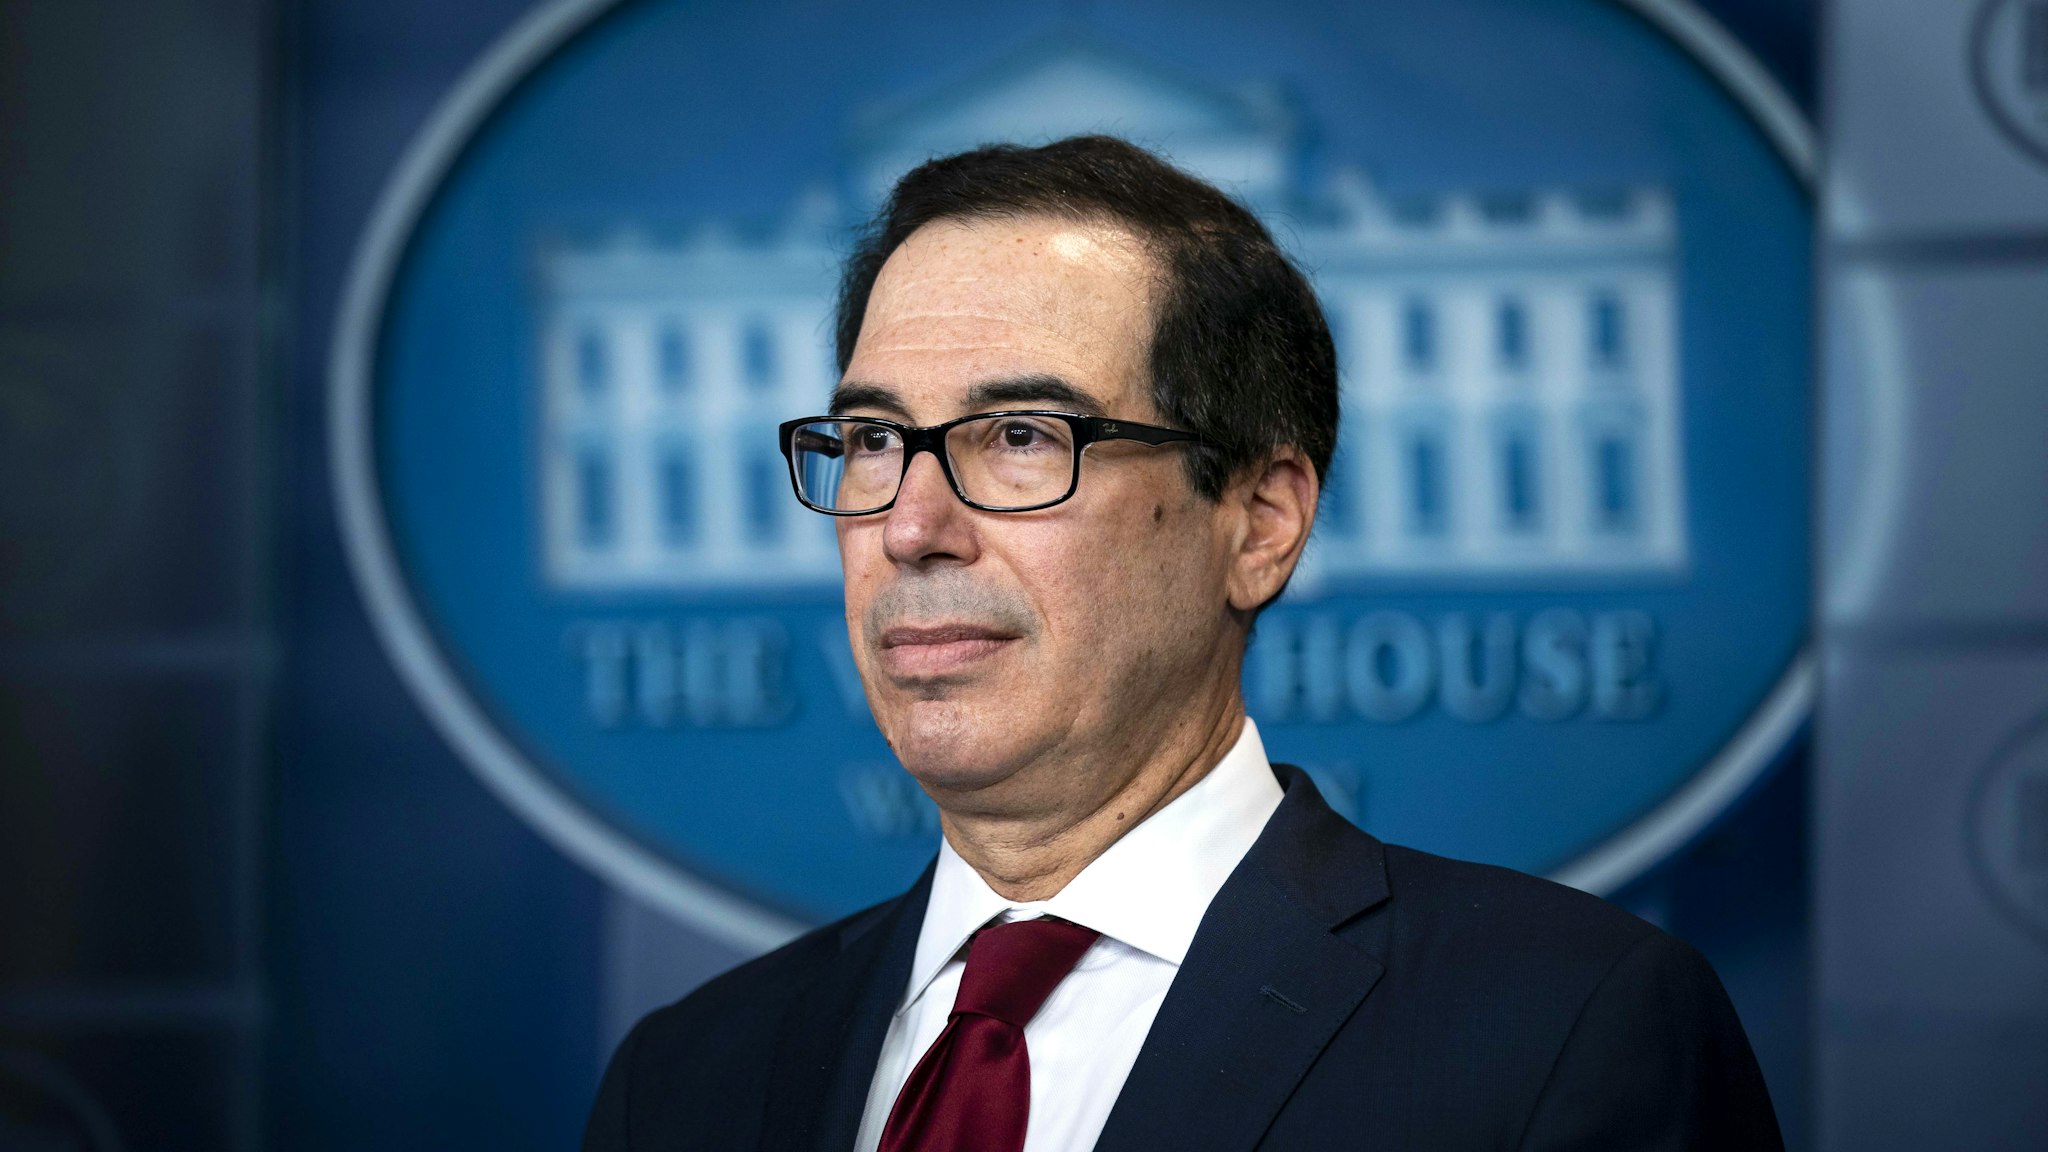 Steven Mnuchin, U.S. Treasury secretary, listens during a briefing at the White House in Washington, D.C., U.S., on Friday, Jan. 10, 2020. The Trump administration imposed new sanctions on Iran on Friday, including penalties on the Islamic Republic's metals and some senior leaders, following Tehran's attack on U.S. military bases.